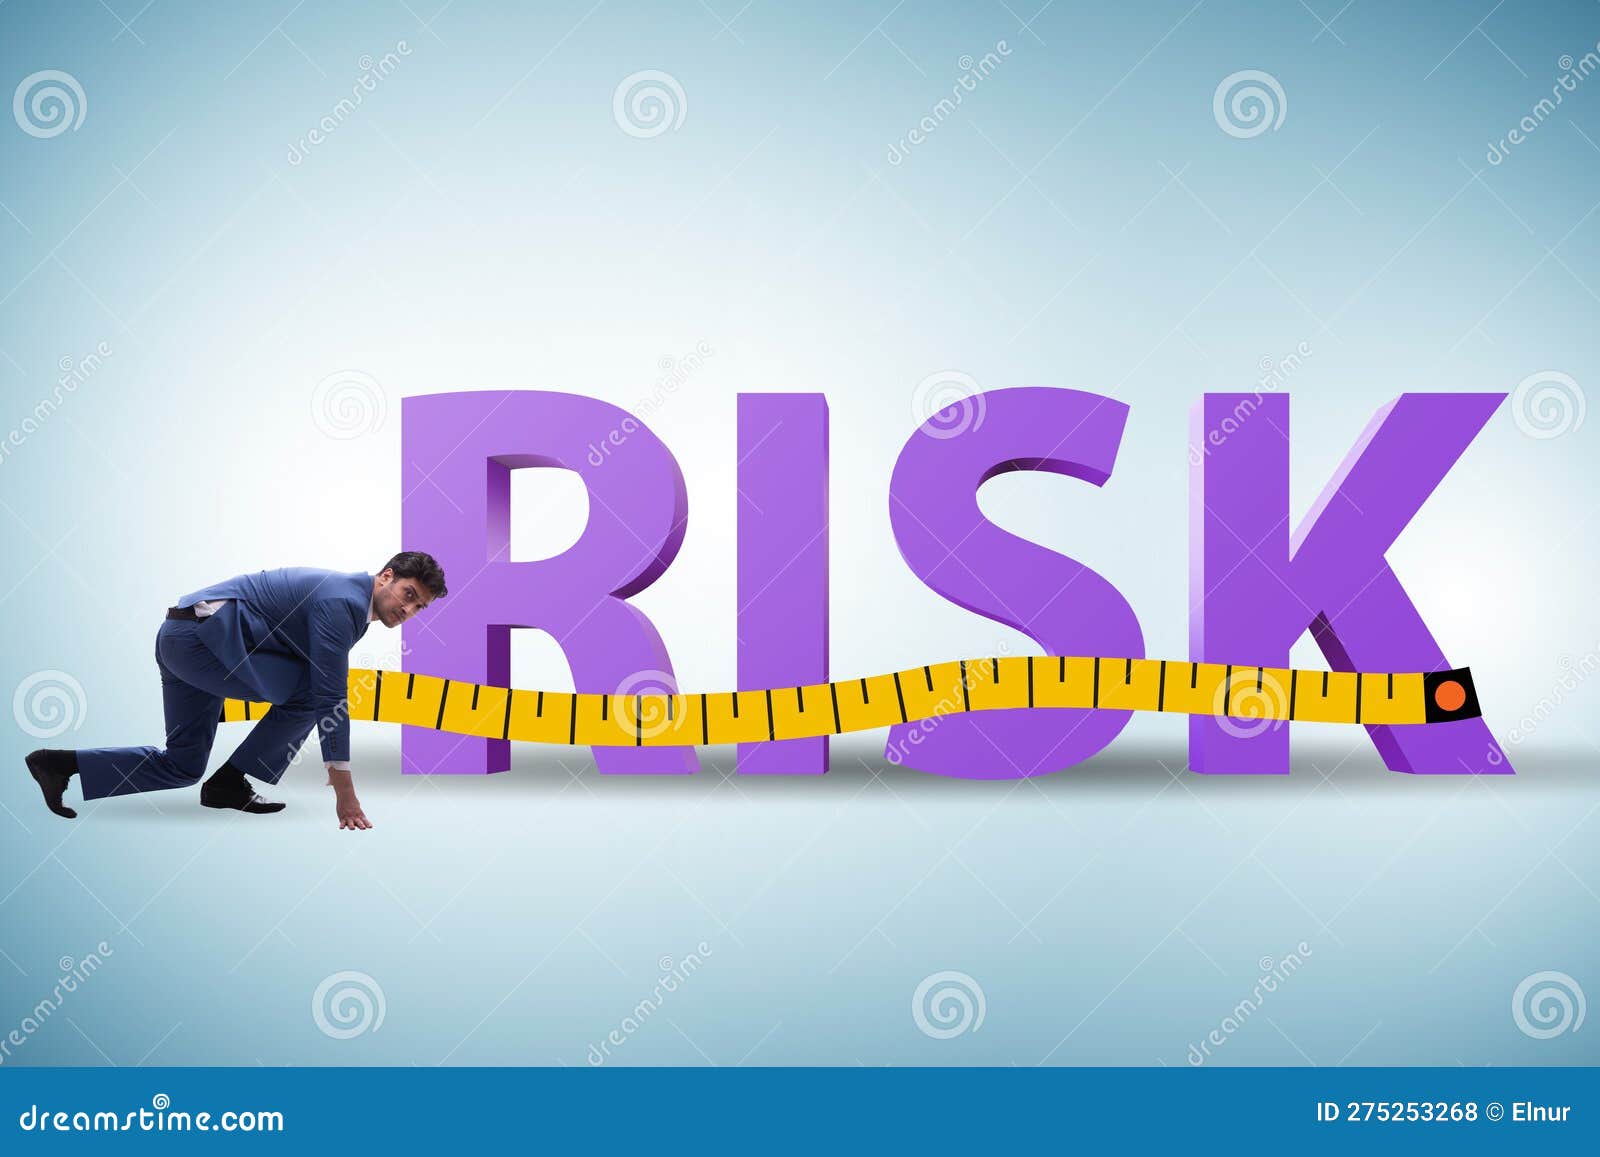 Risk Measurement and Assessment Concept Stock Photo - Image of data ...